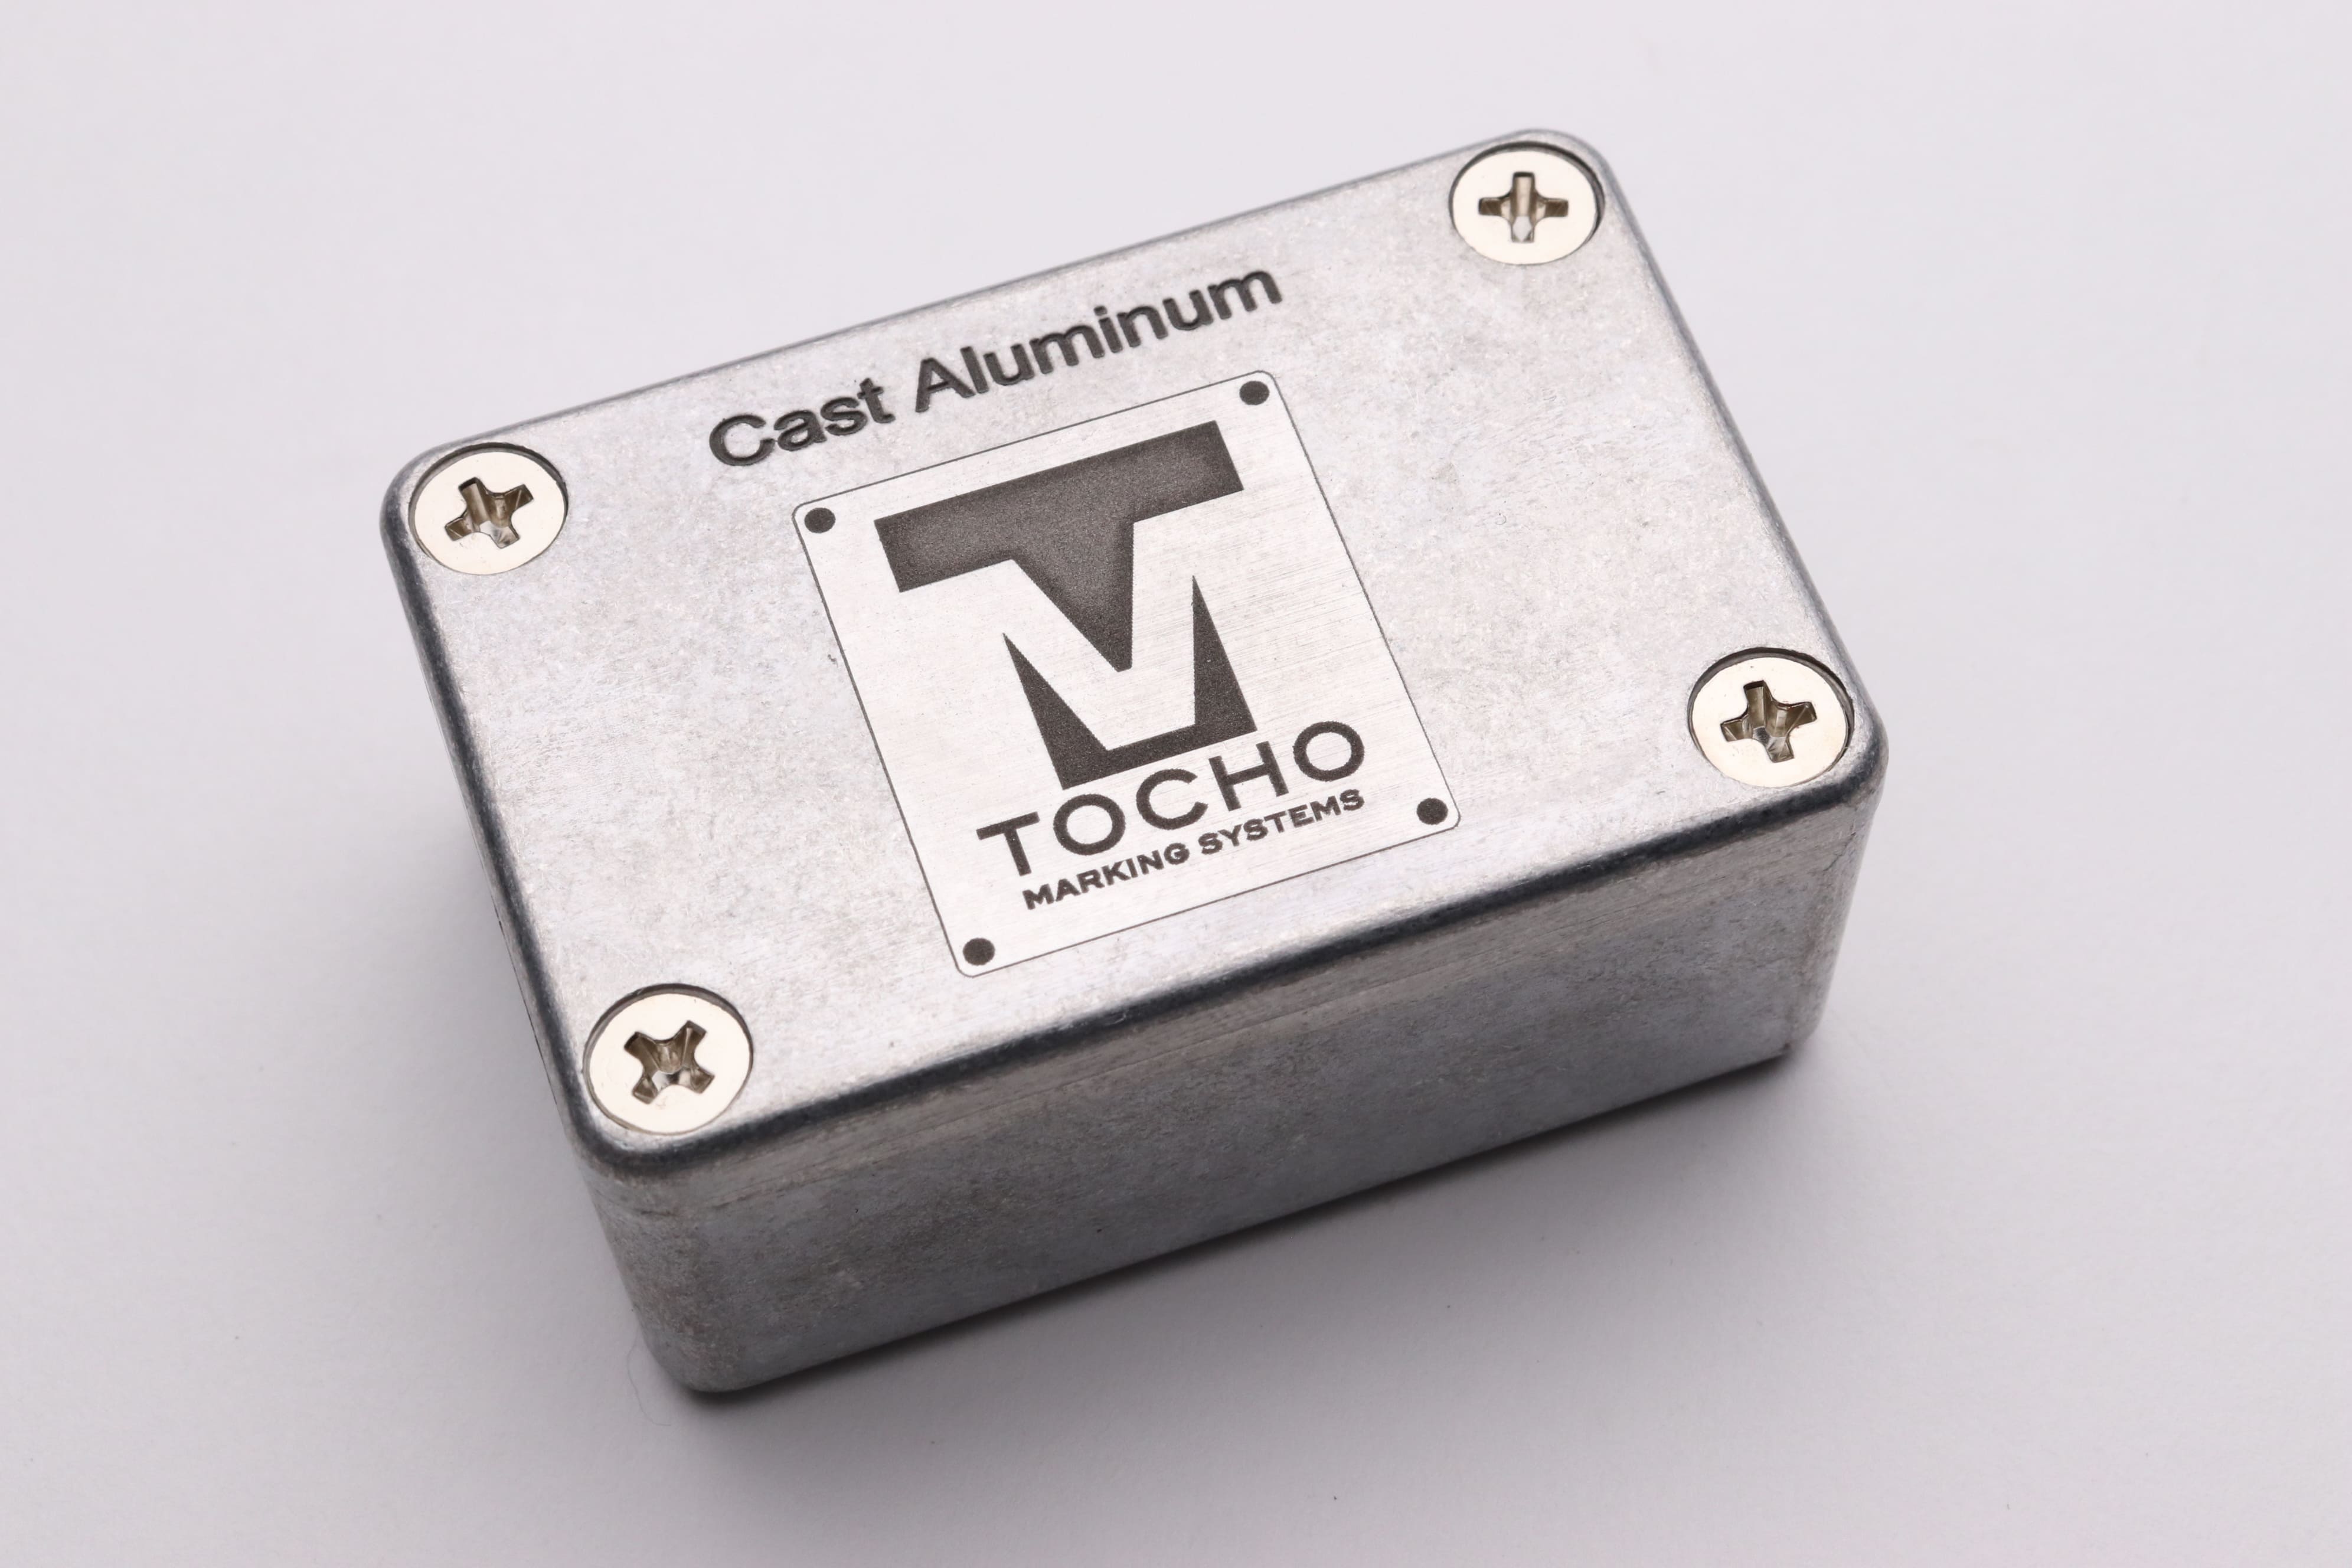 Image of cast aluminum engraved with the text 'Cast Aluminum' and the Tocho logo